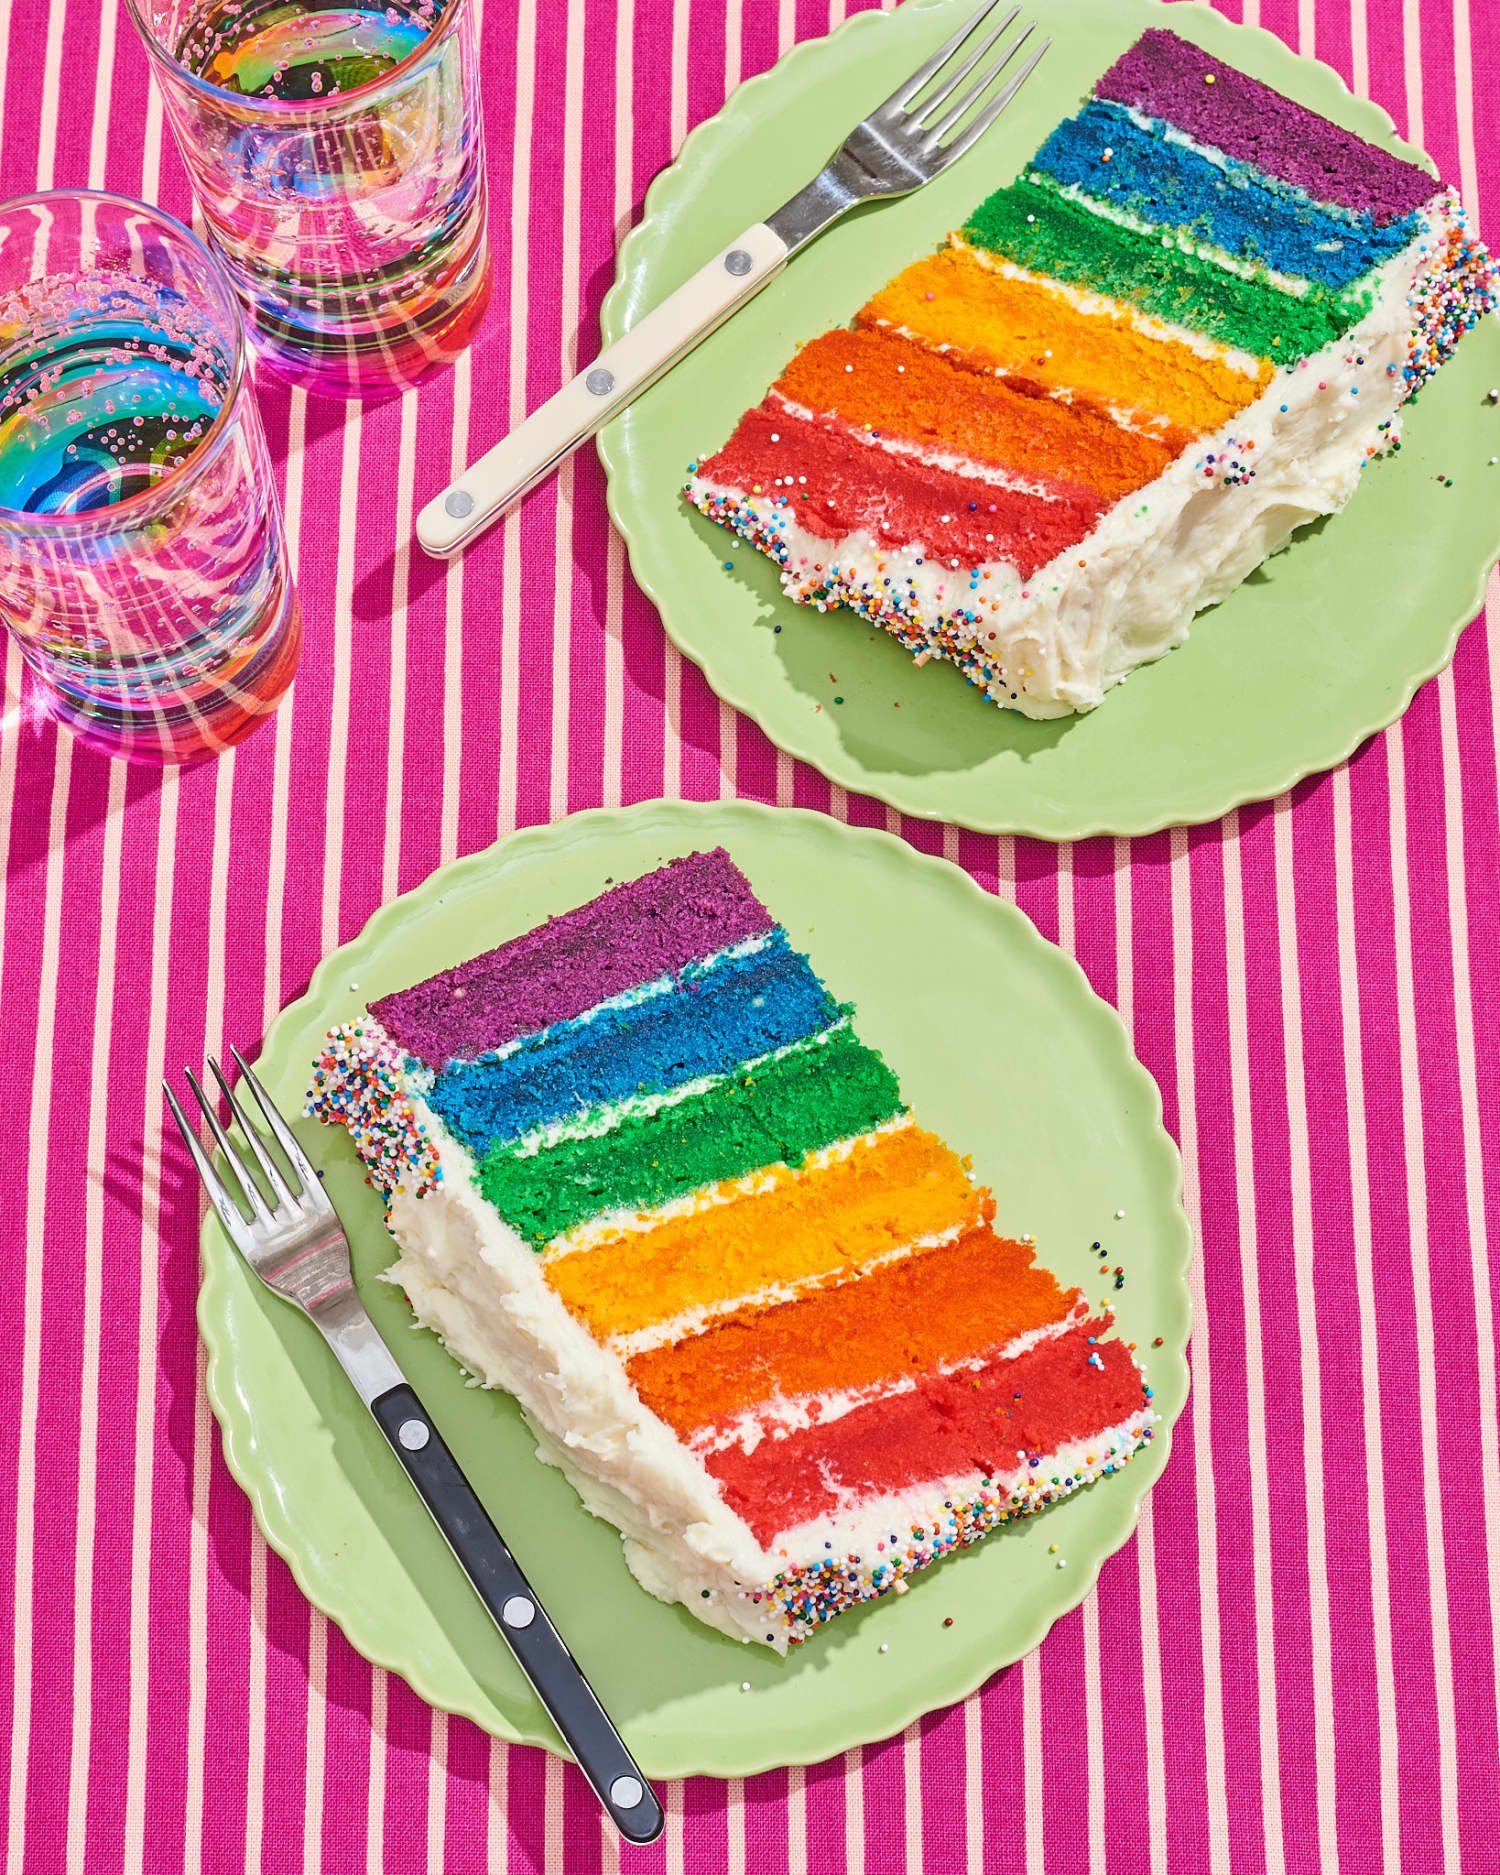 This Rainbow Cake Is a Reminder of Our Proud Community (Plus, It's Delicious)